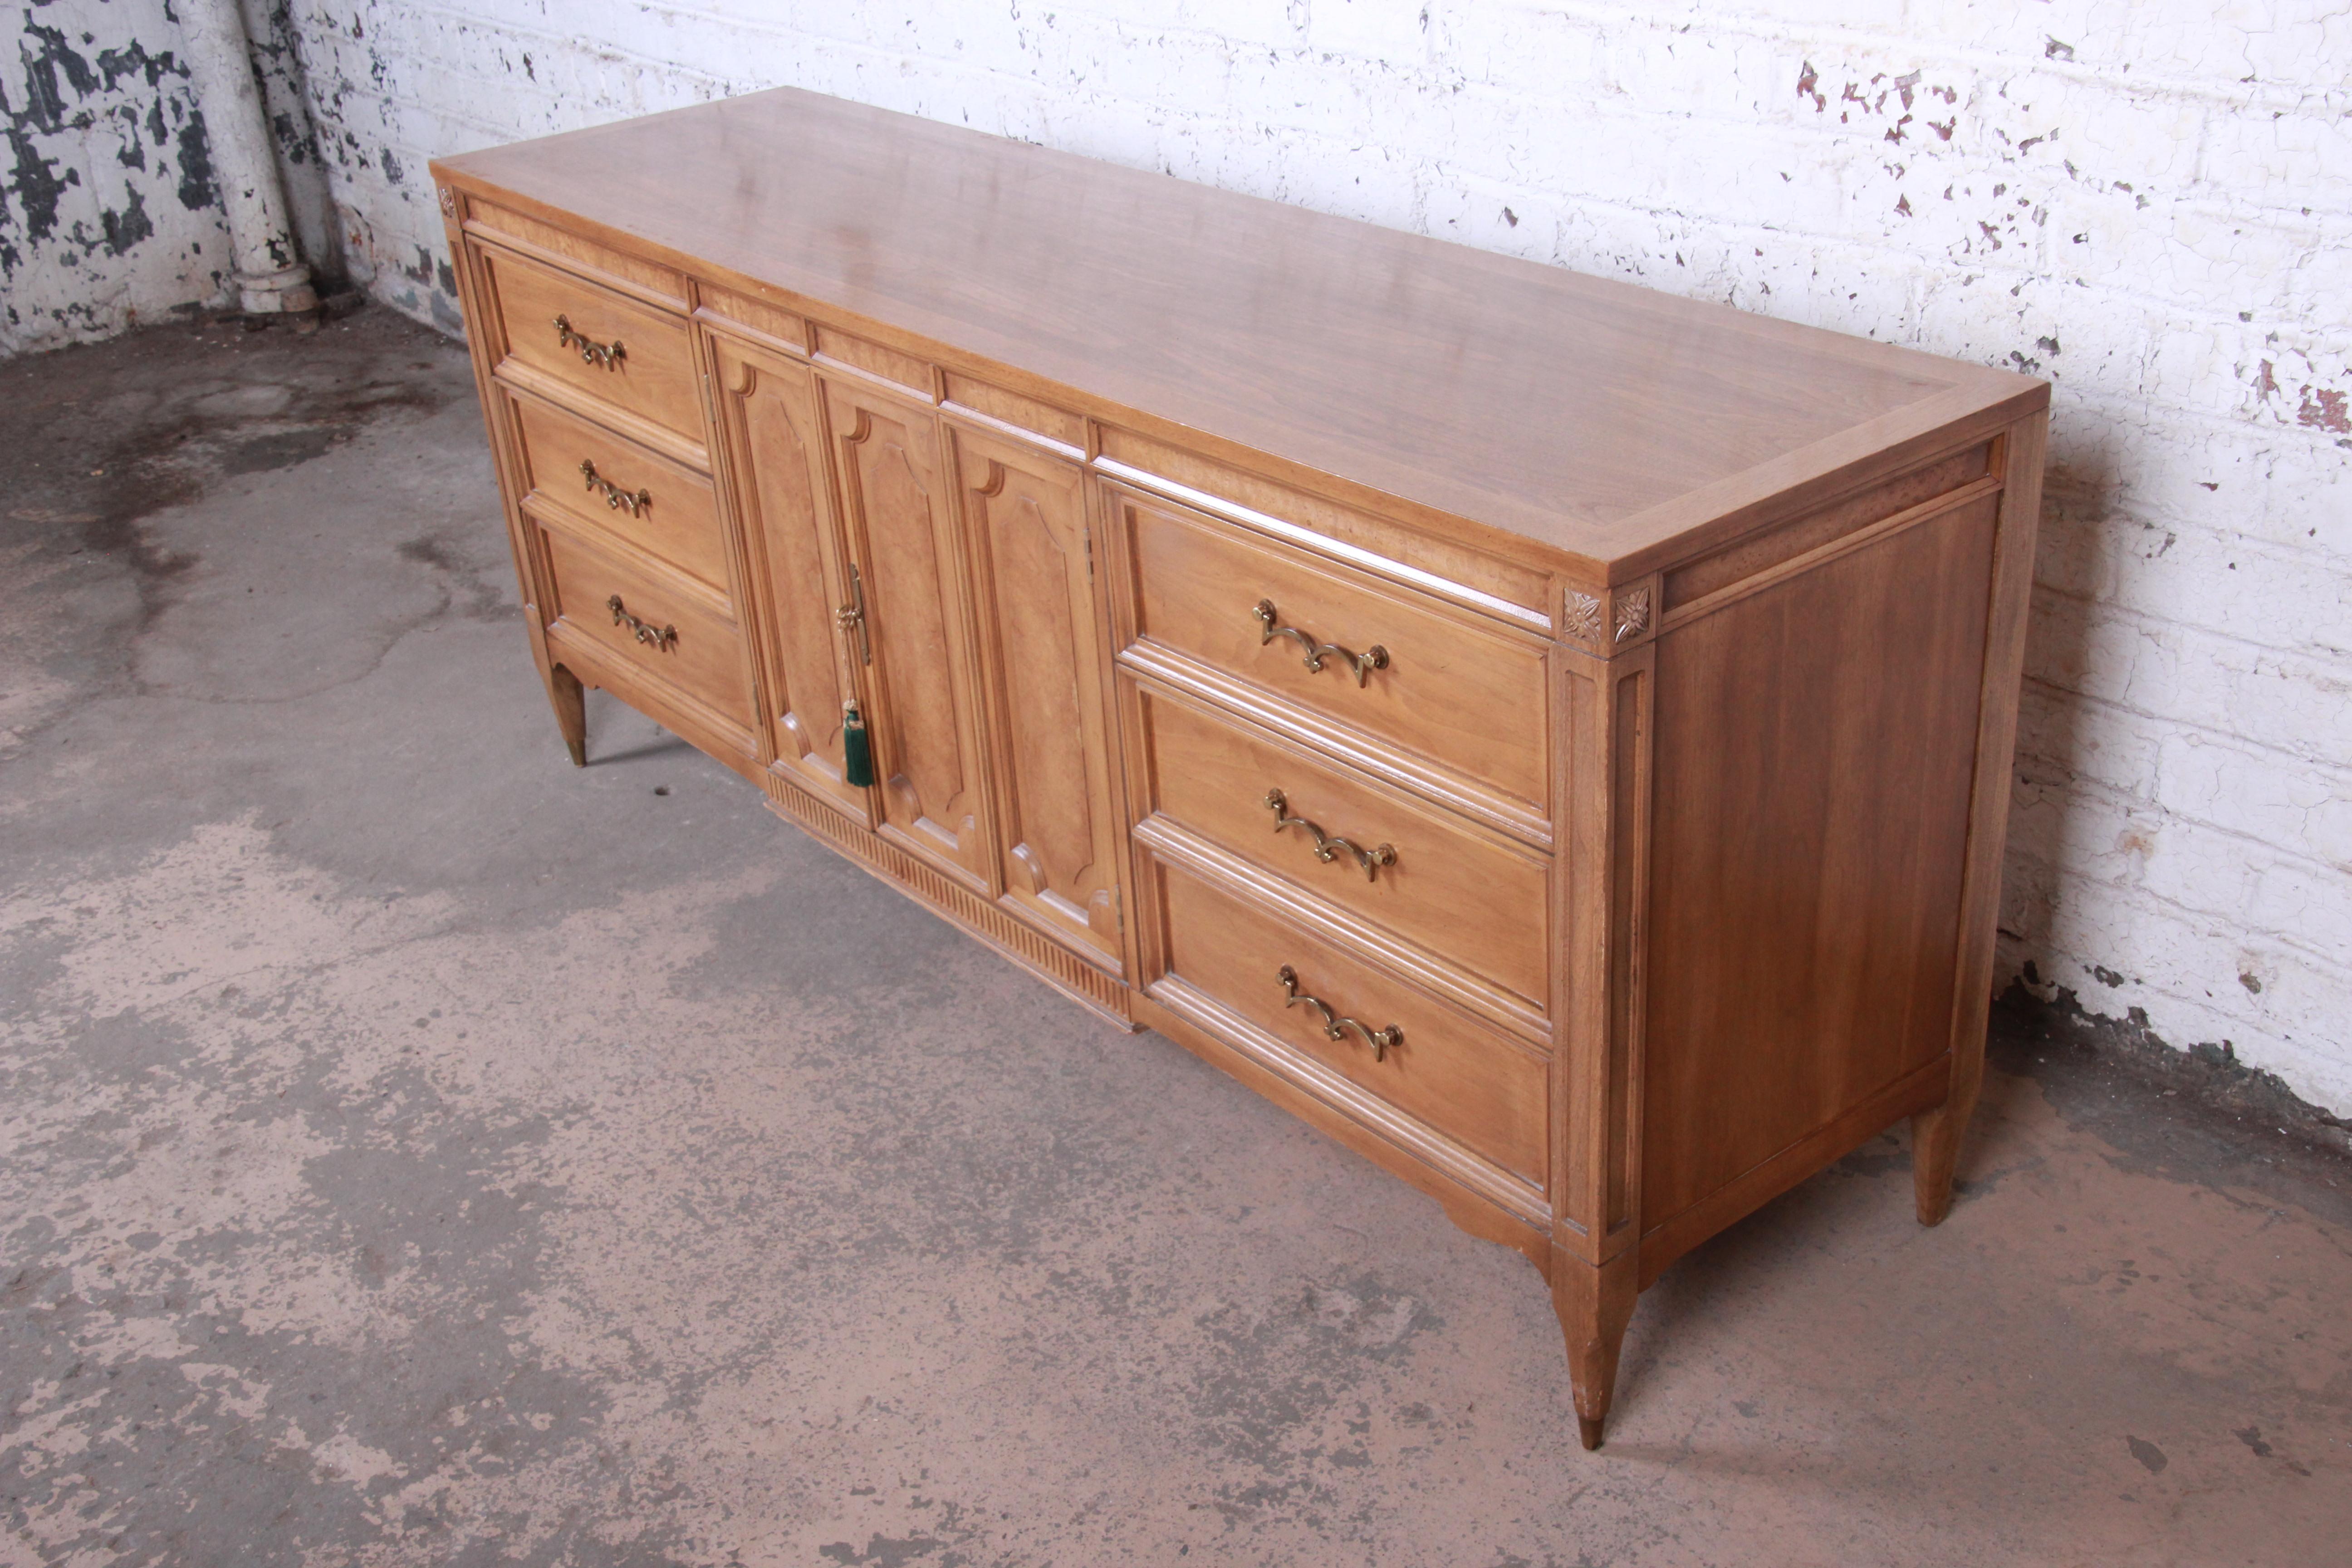 Mid-20th Century American of Martinsville Mid-Century Modern Cherry and Burl Dresser or Credenza